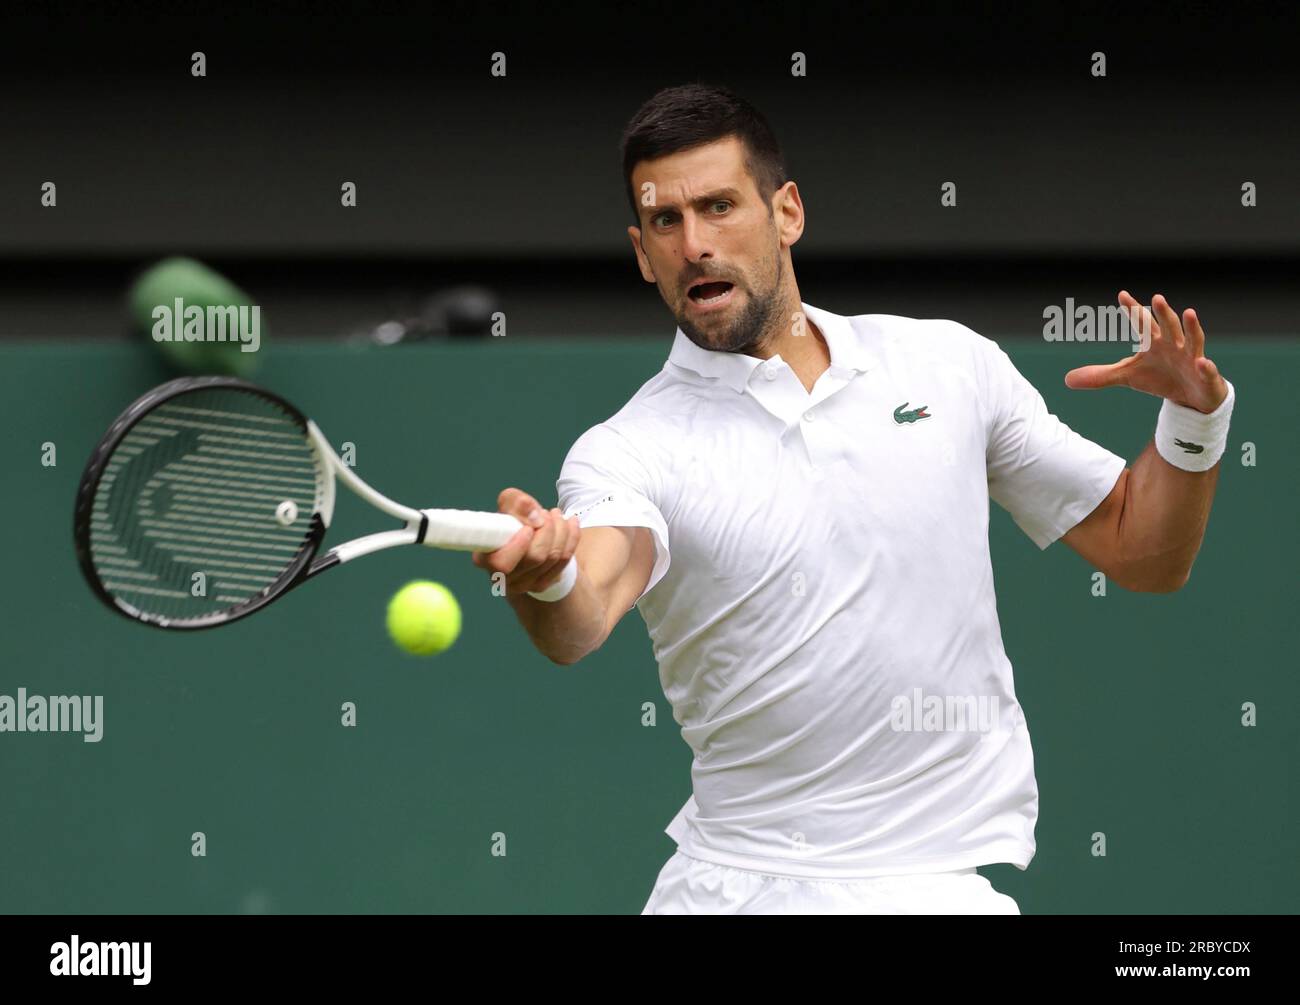 Novak Djokovic of Serbia hits a ball during the Gentlemens Singles Quarter-finals match against Andrey Rublev of Russia in the Championships, Wimbledon at All England Lawn Tennis and Croquet Club in London,